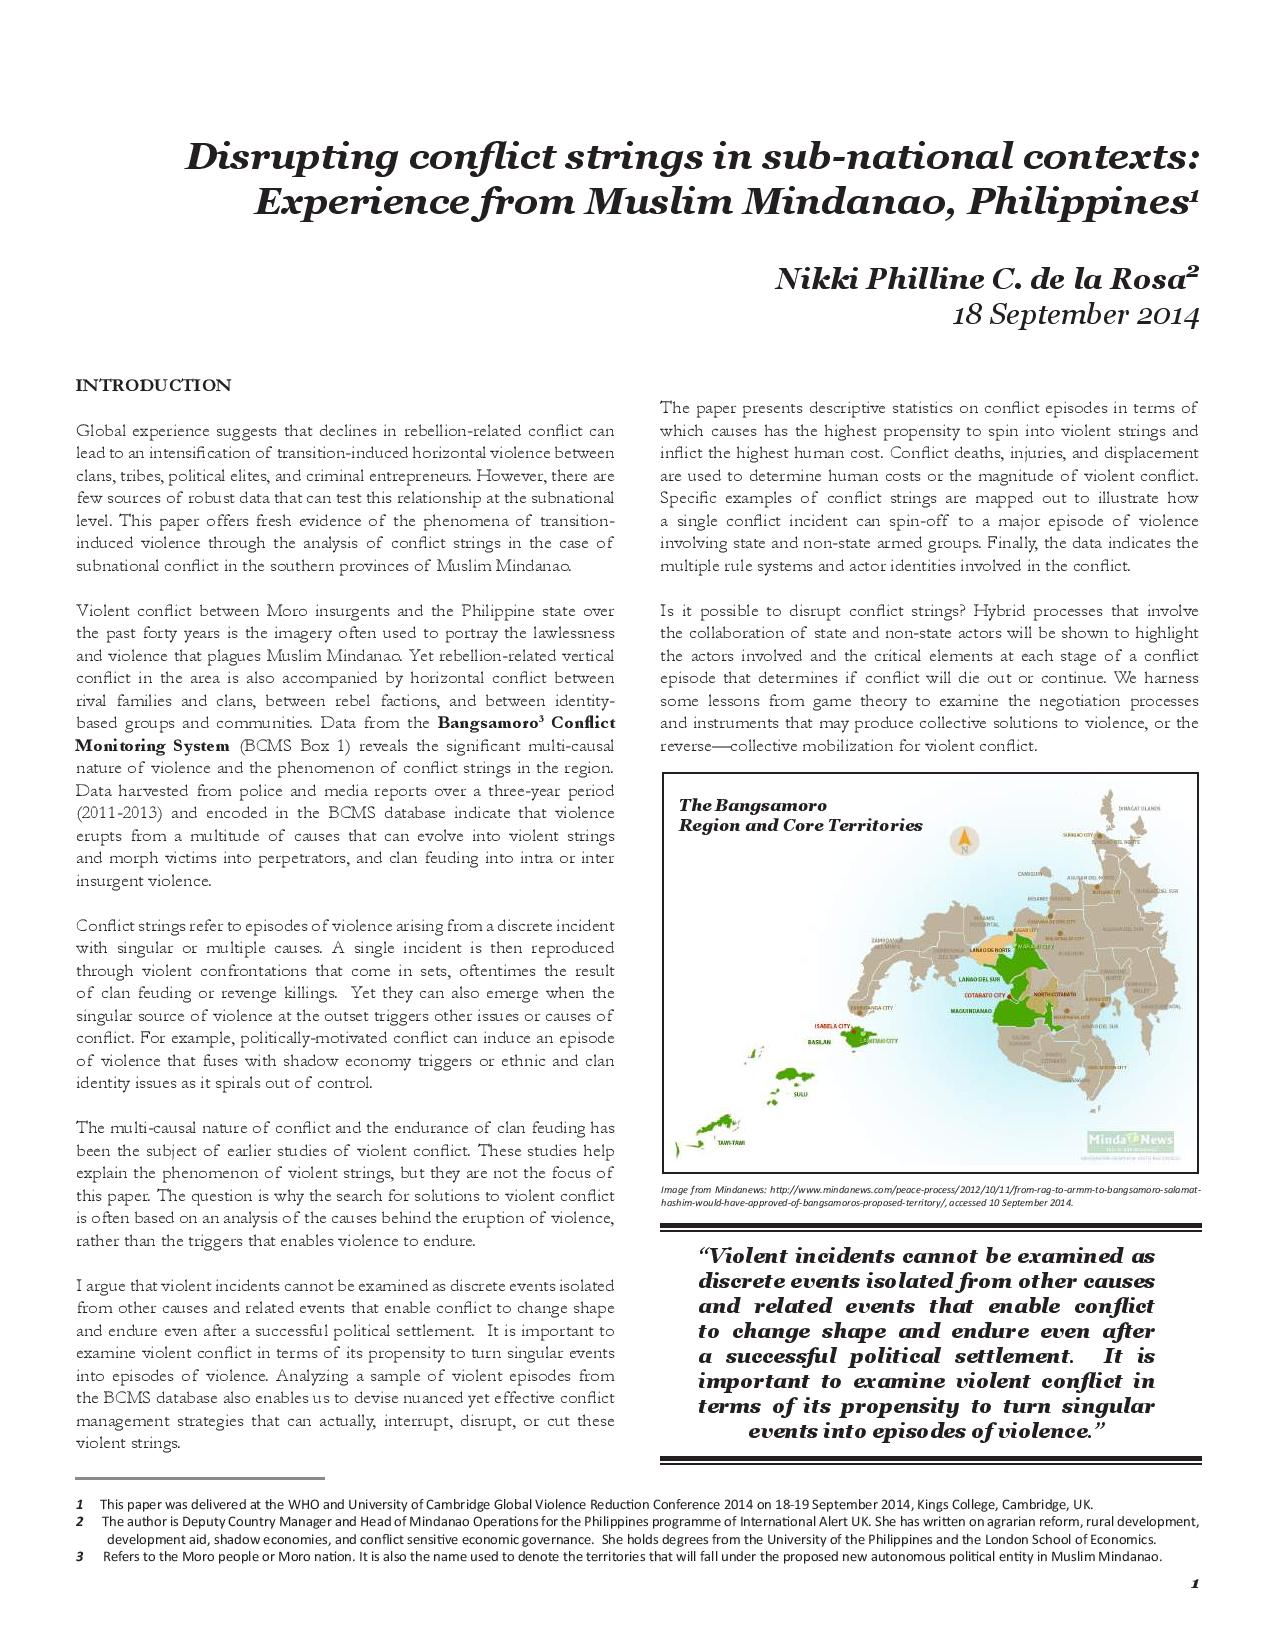 Disrupting conflict strings in sub-national contexts: Experience from Muslim Mindanao, Philippines